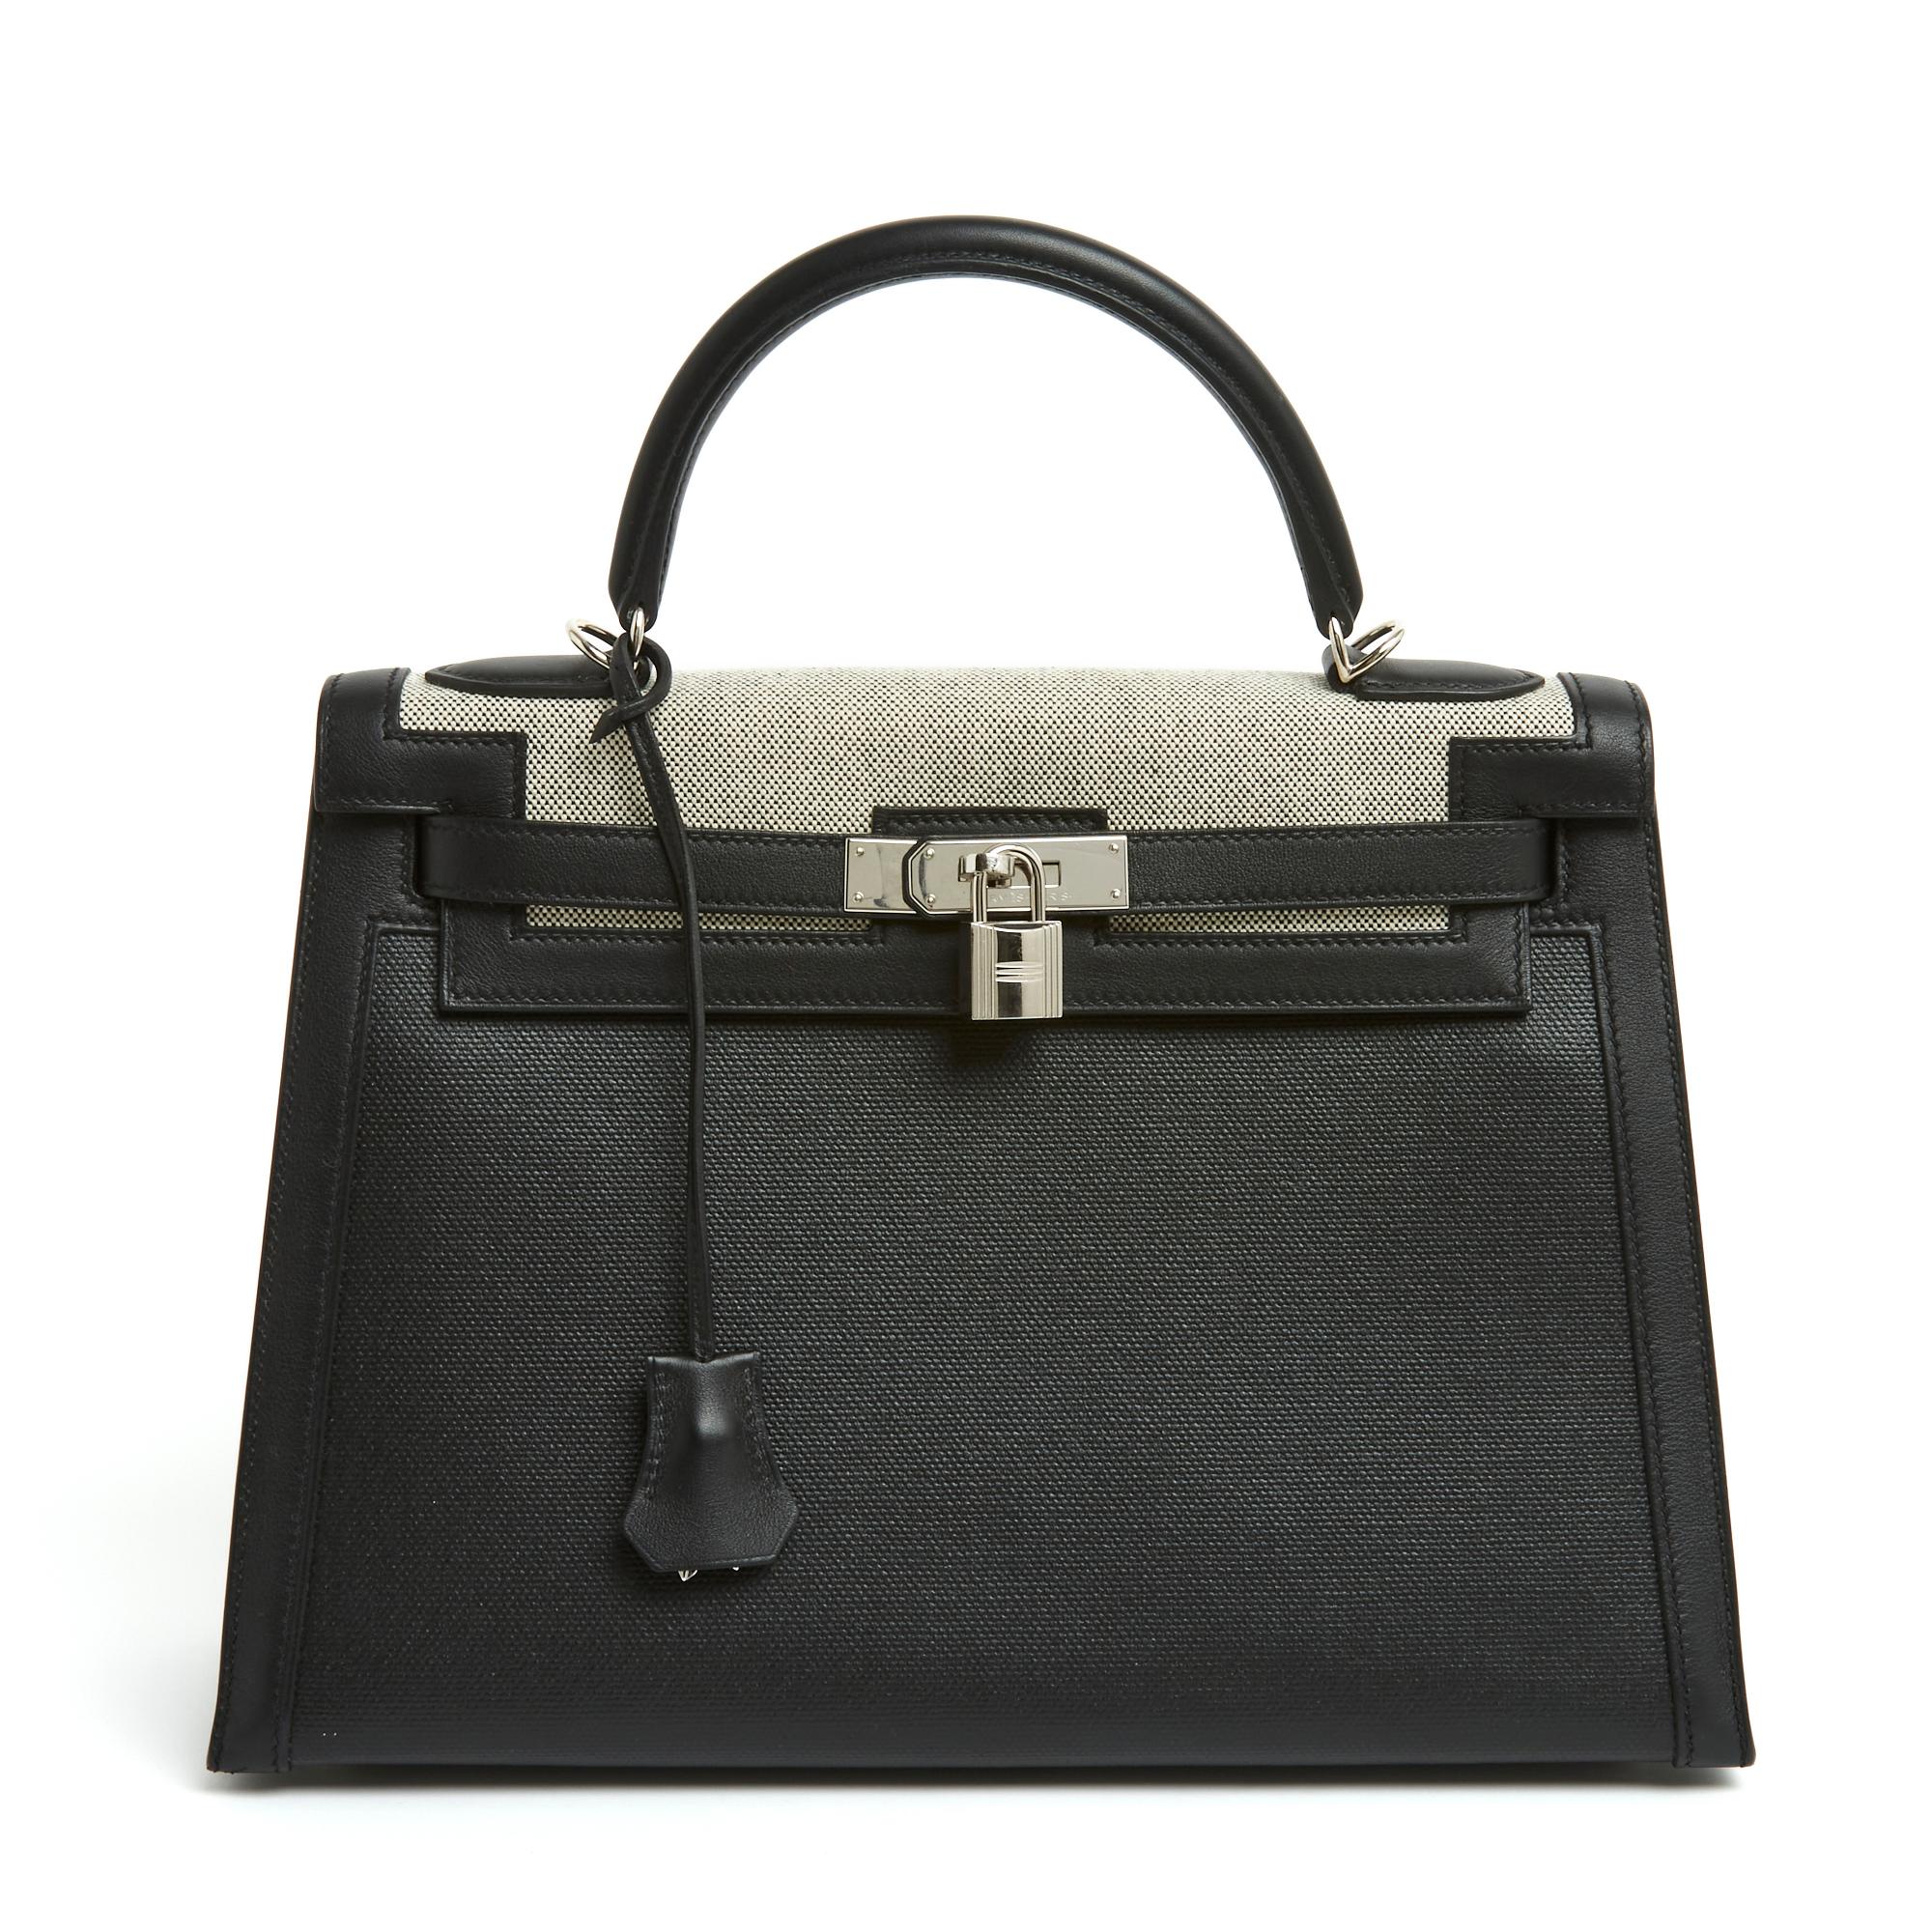 Hermès Kelly II Sellier model bag, size 32, in black grained leather and natural-colored Hermès canvas (on the flap) or black (body of the bag) and silver metal (palladium), interior in black leather with a pocket closed by a zip with puller leather